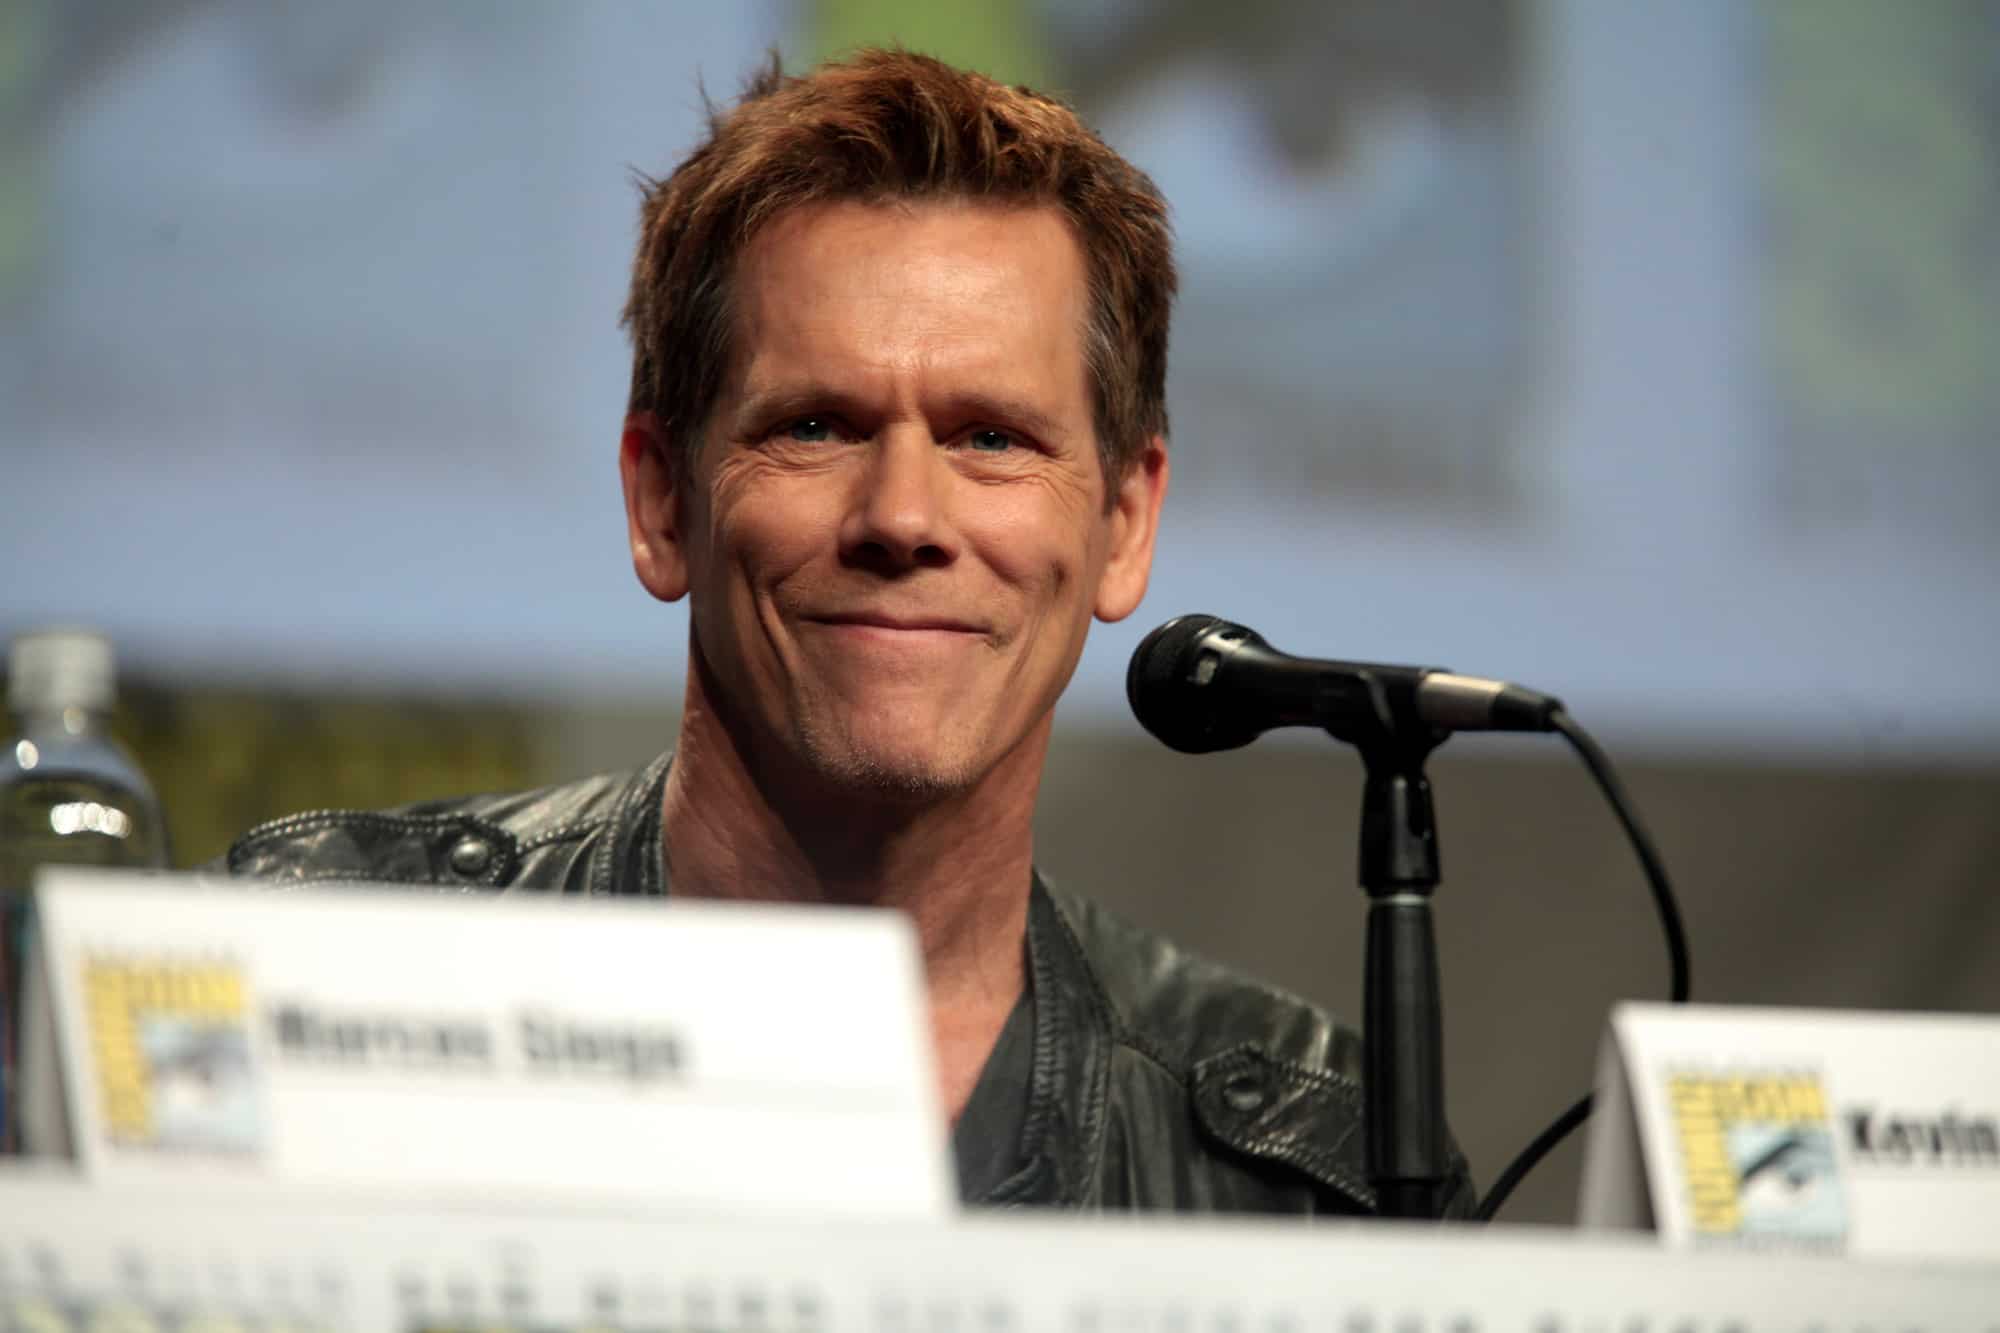 Kevin Bacon speaking at microphone